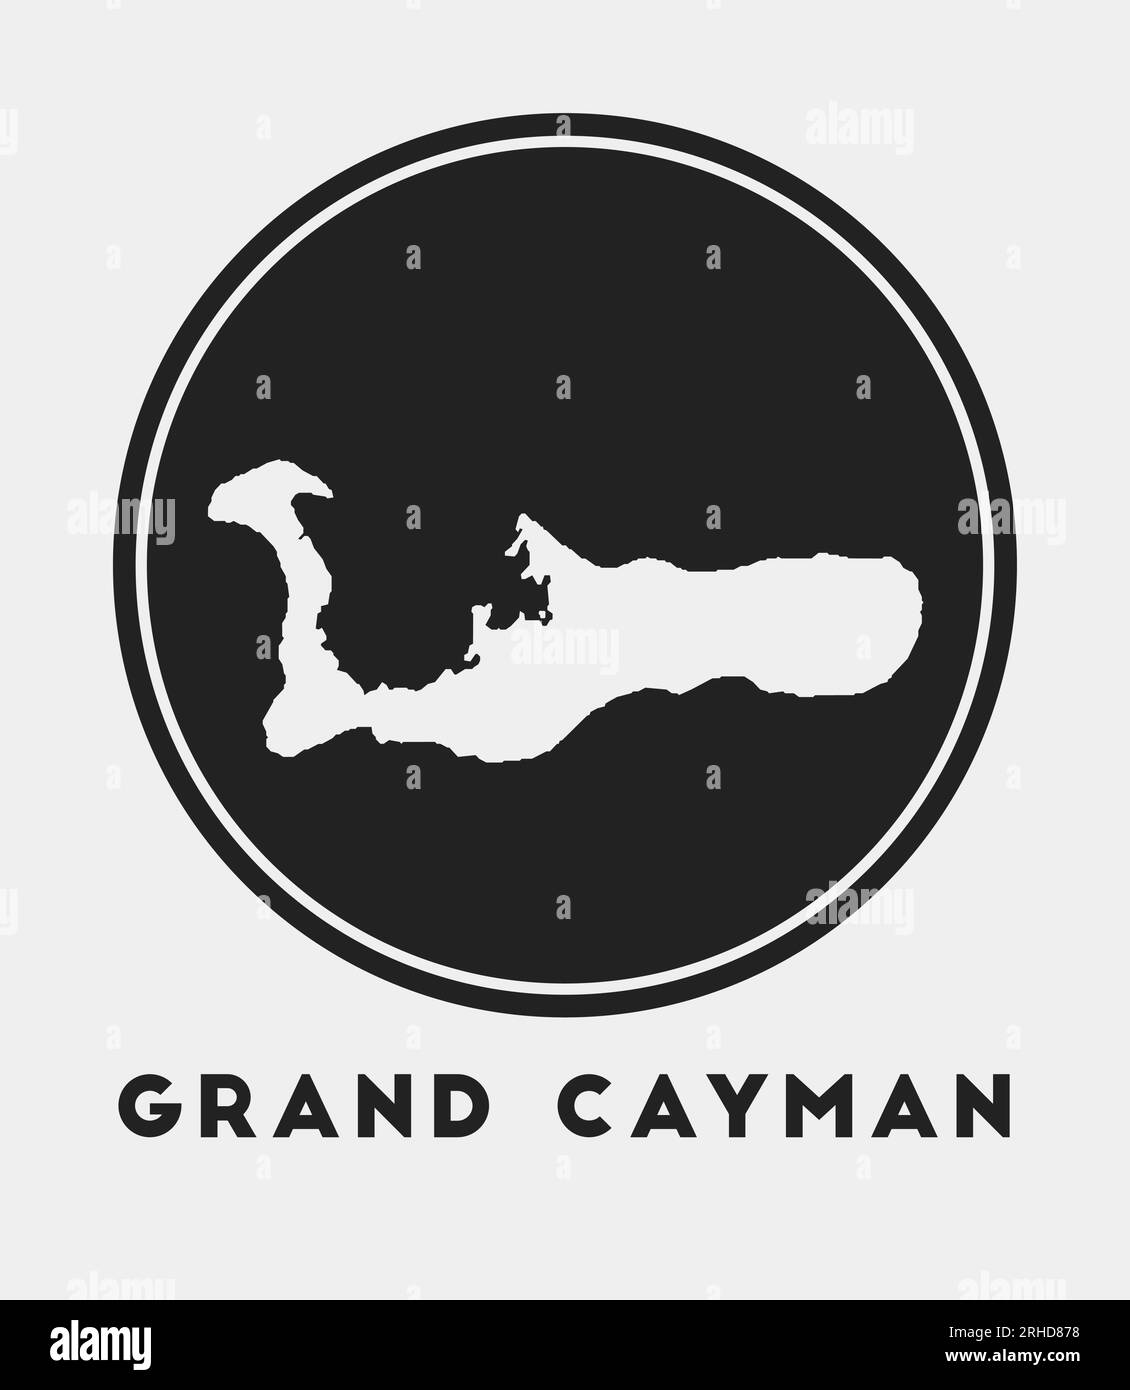 Grand Cayman icon. Round logo with island map and title. Stylish Grand ...